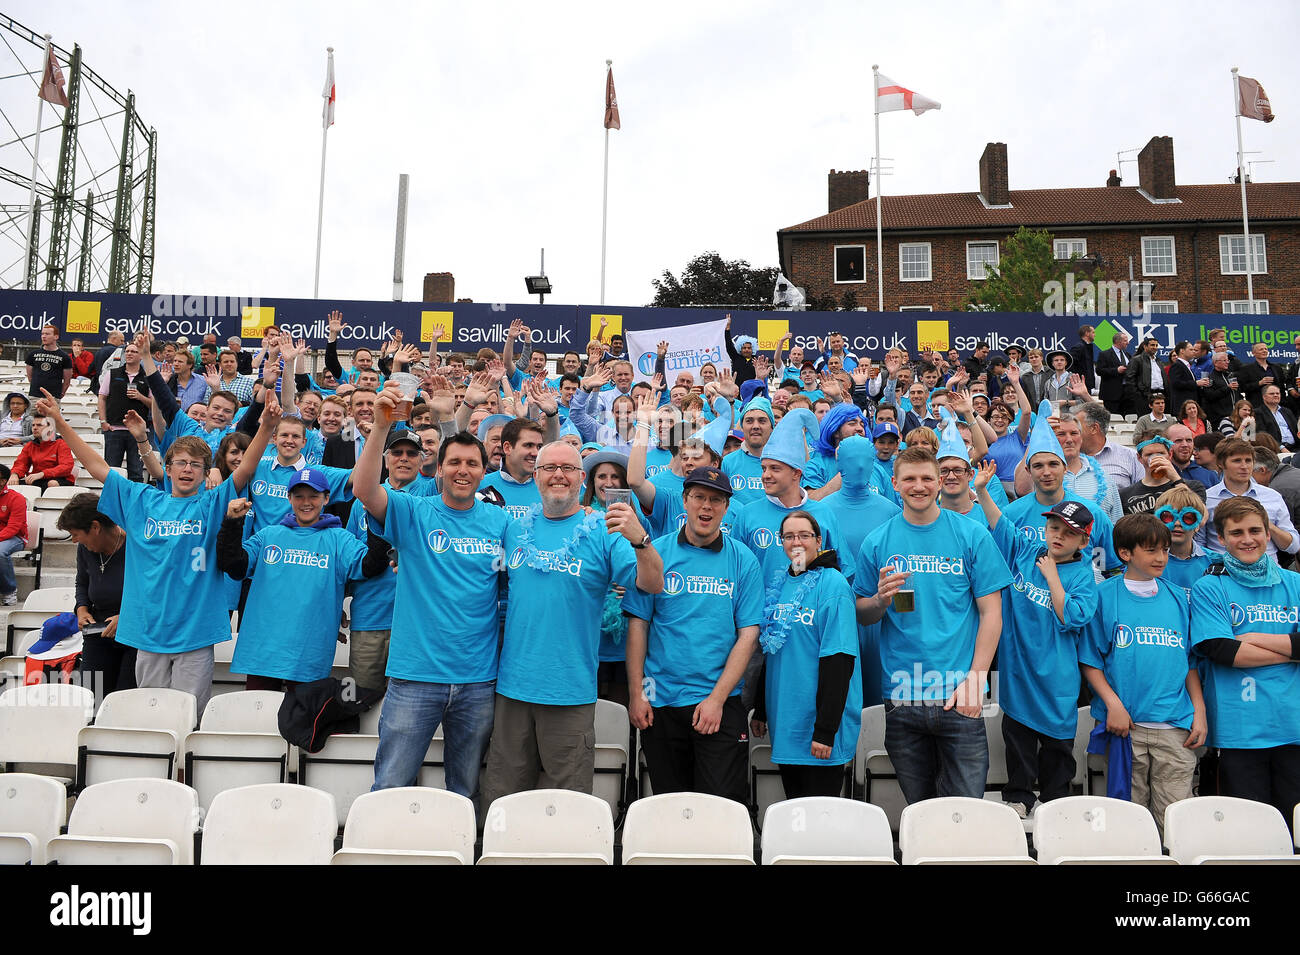 Spectators wearing shirts in aid of Cricket United before the game between England and New Zealand Stock Photo